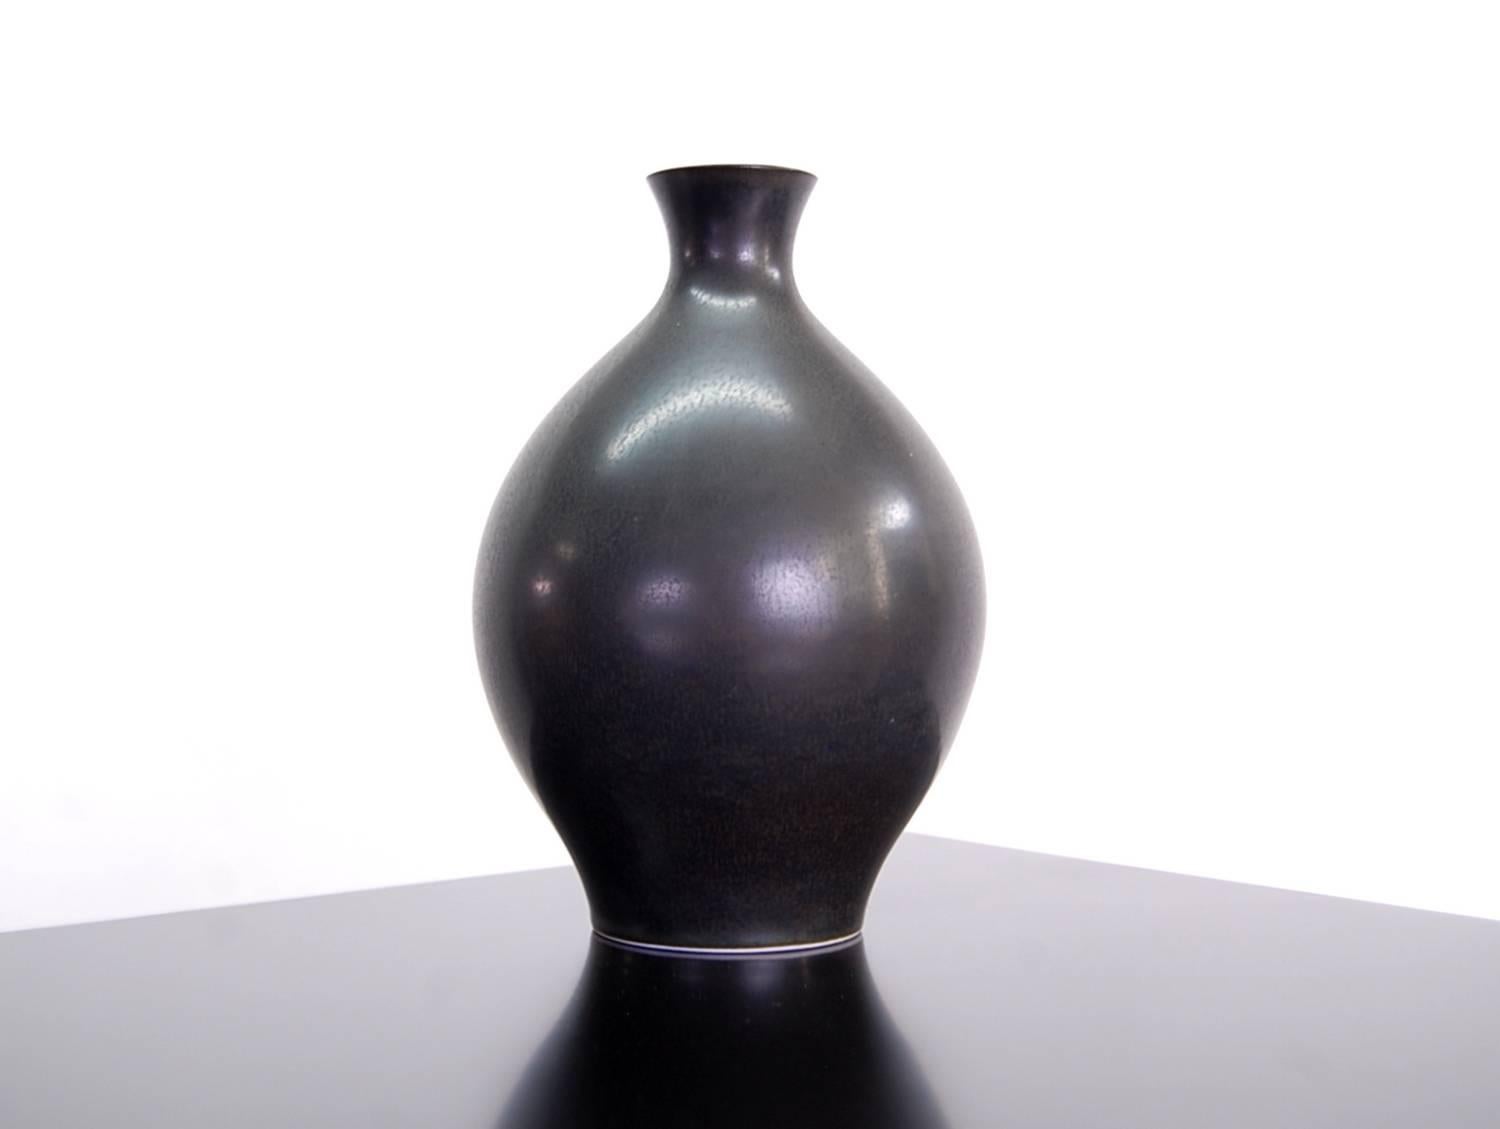 Porcelain vase by Carl-Harry Stålhane (signed CHS) for Rörstrand, Sweden, circa, 1960.

We offer free delivery on most of our items within the long Island or greater NYC, Northern New Jersey and New England areas. Please inquire for further